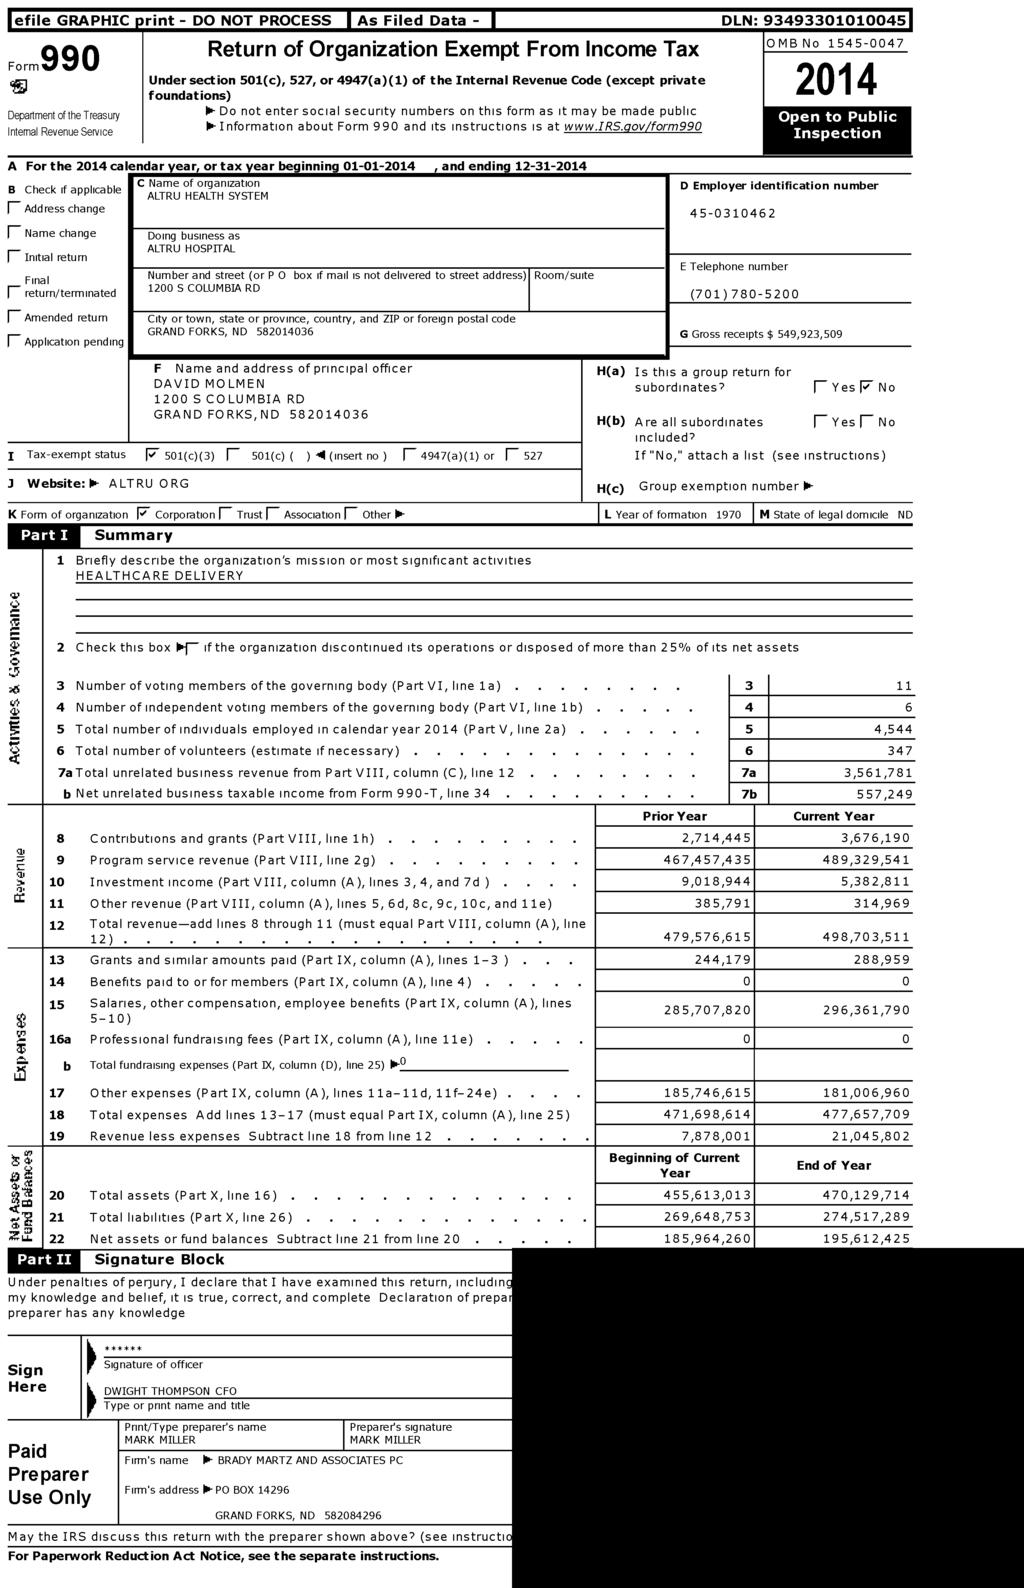 lefile GRAPHIC print - DO NOT PROCESS I As Filed Data - I DLN: 934933010100451 OMB 1545-0047 990 Return of Organization Exempt From Income Tax Form Under section 501 (c), 527, or 4947 ( a)(1) of the